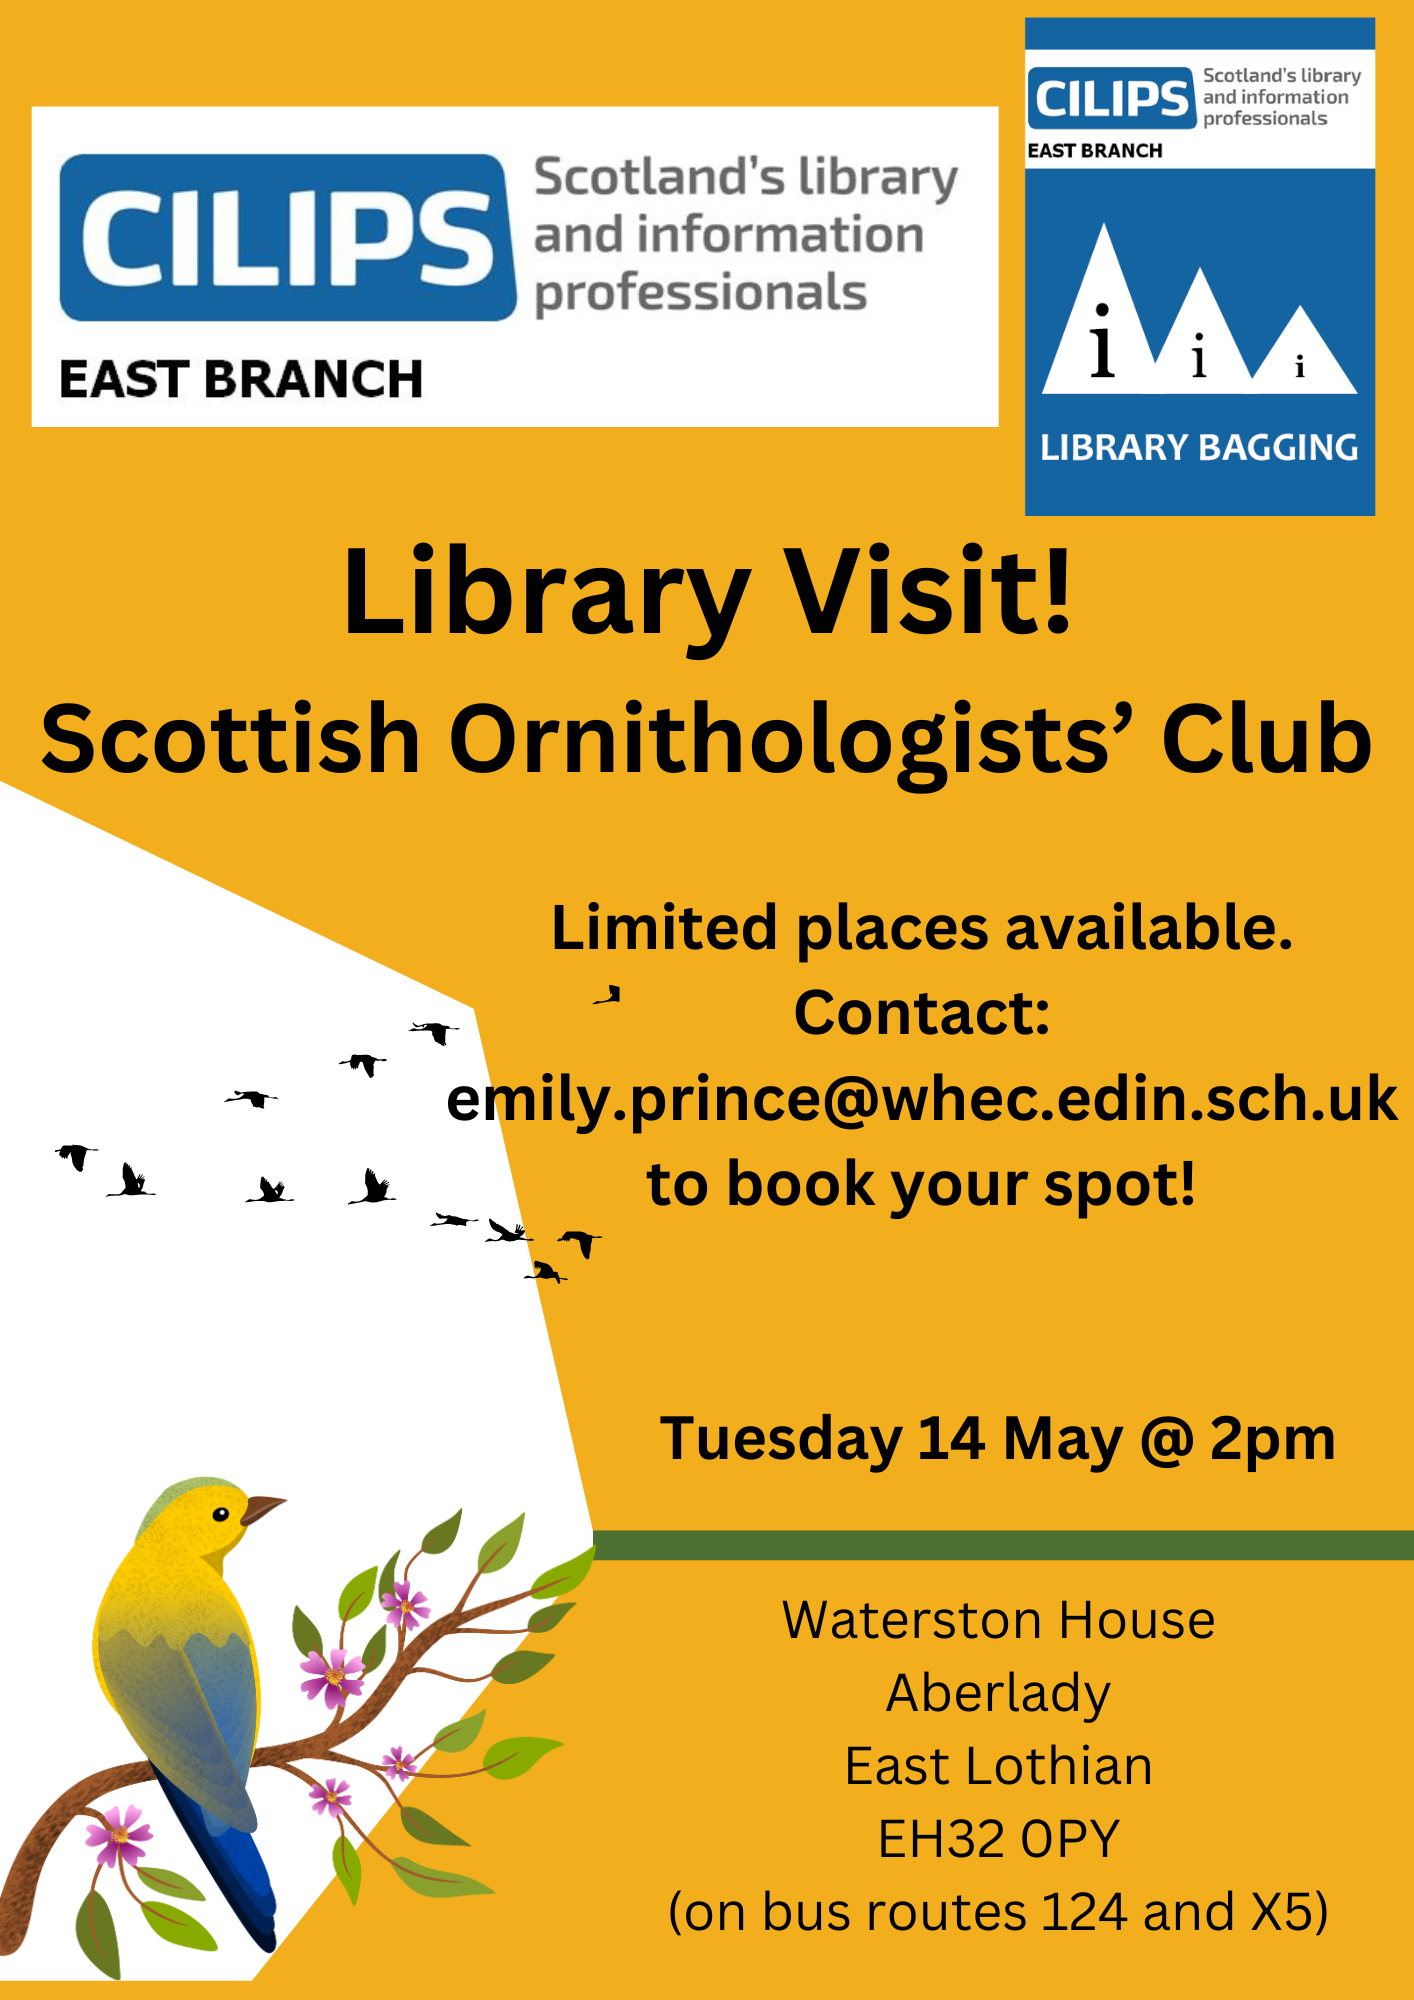 CILIPS East Branch Library Visit: Scottish Ornithologists' Club. Tuesday 14th May @ 2pm; email Emily.Prince@whec.edin.sch.uk to RSVP.